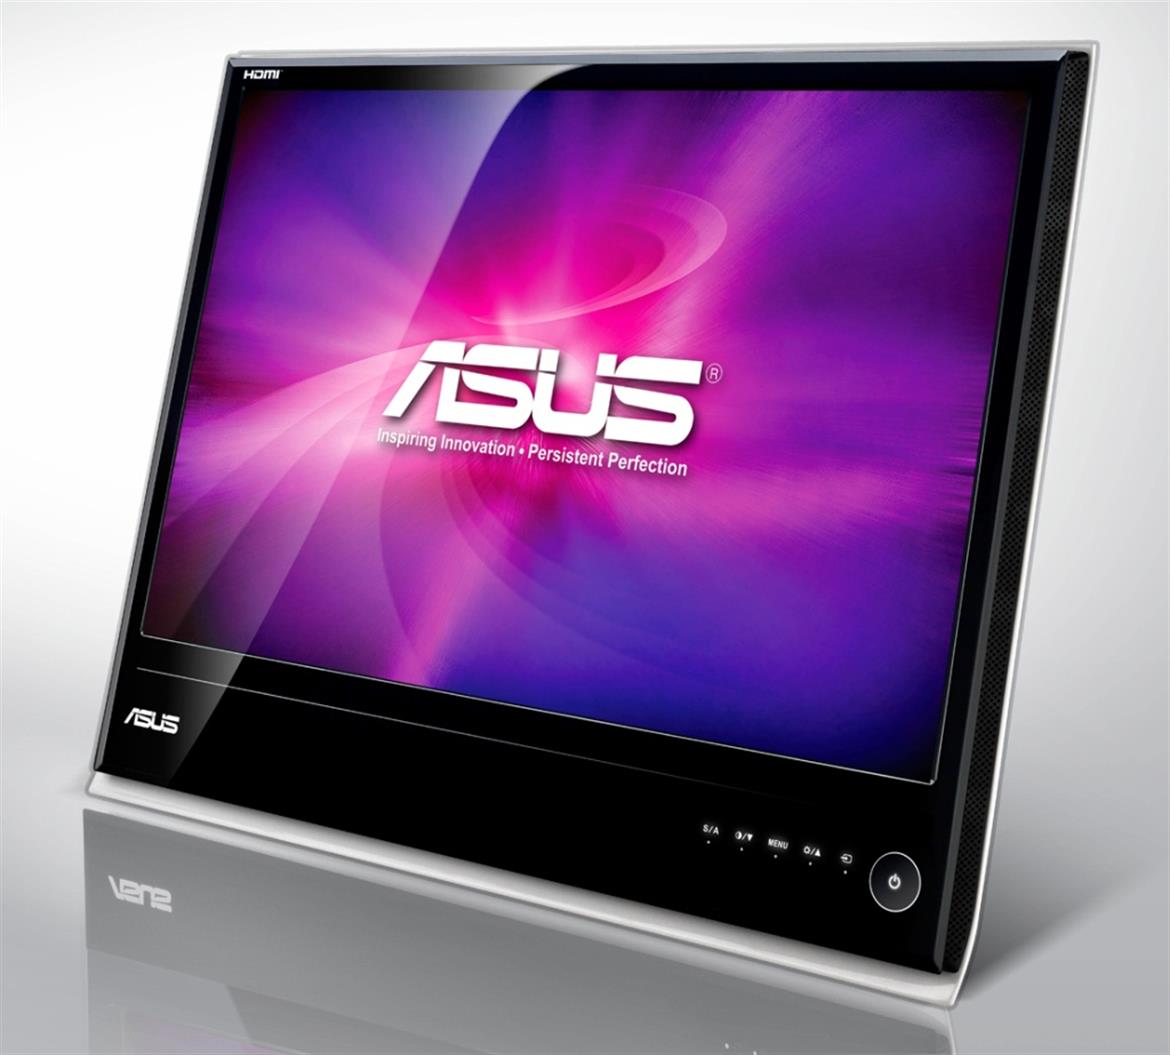 Asus MS238H LCD Monitor Review